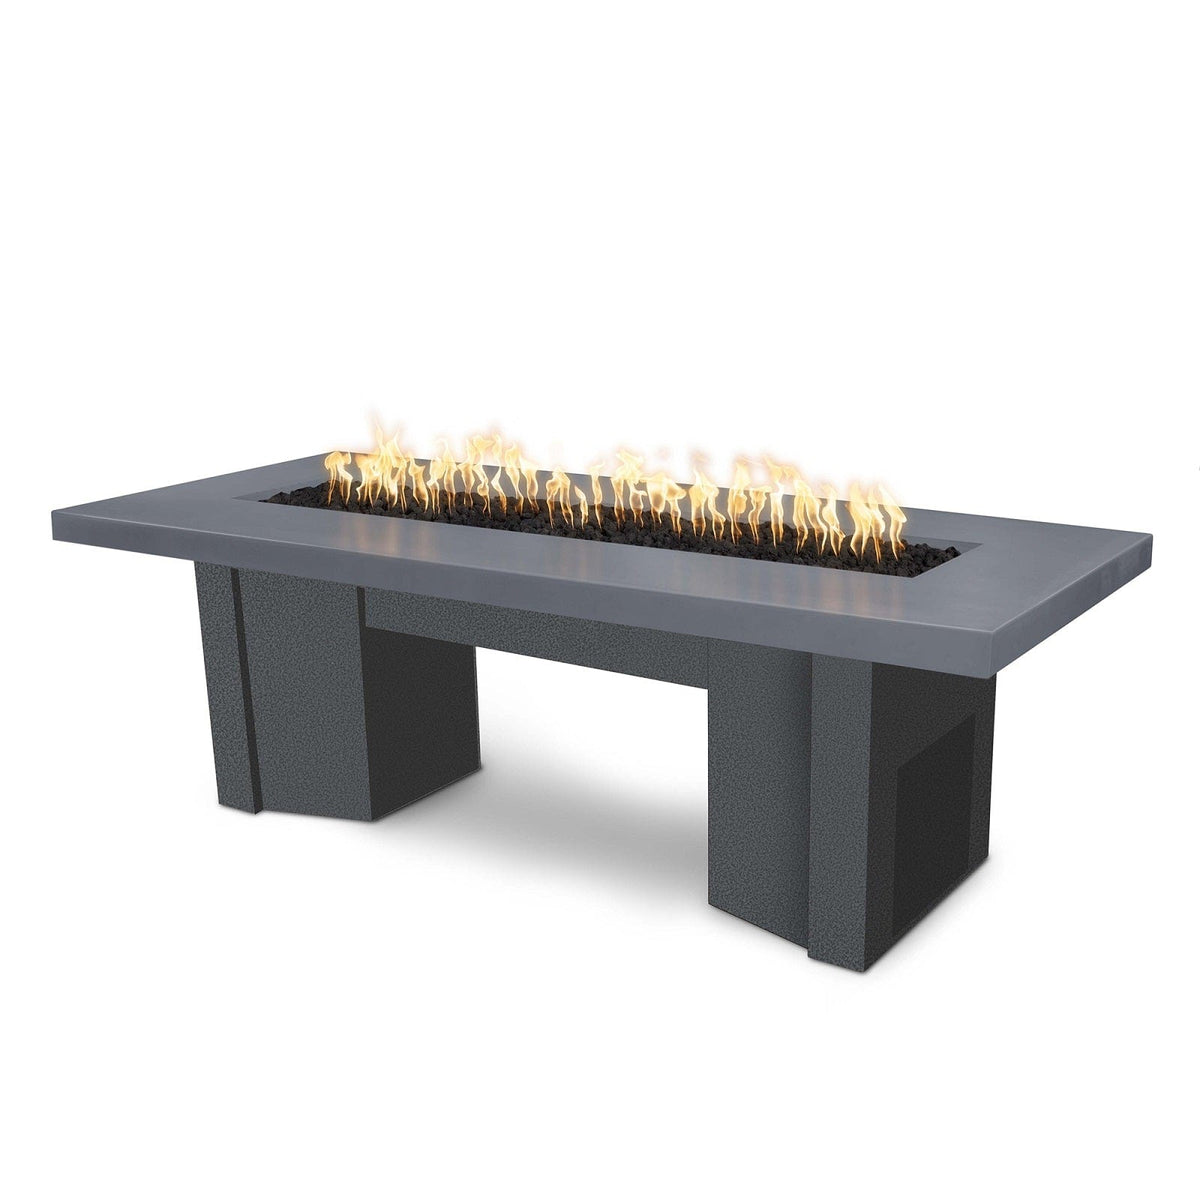 The Outdoor Plus Fire Features Gray (-GRY) / Silver Vein Powder Coated Steel (-SLV) The Outdoor Plus 78&quot; Alameda Fire Table Smooth Concrete in Natural Gas - Match Lit with Flame Sense System / OPT-ALMGFRC78FSML-NG